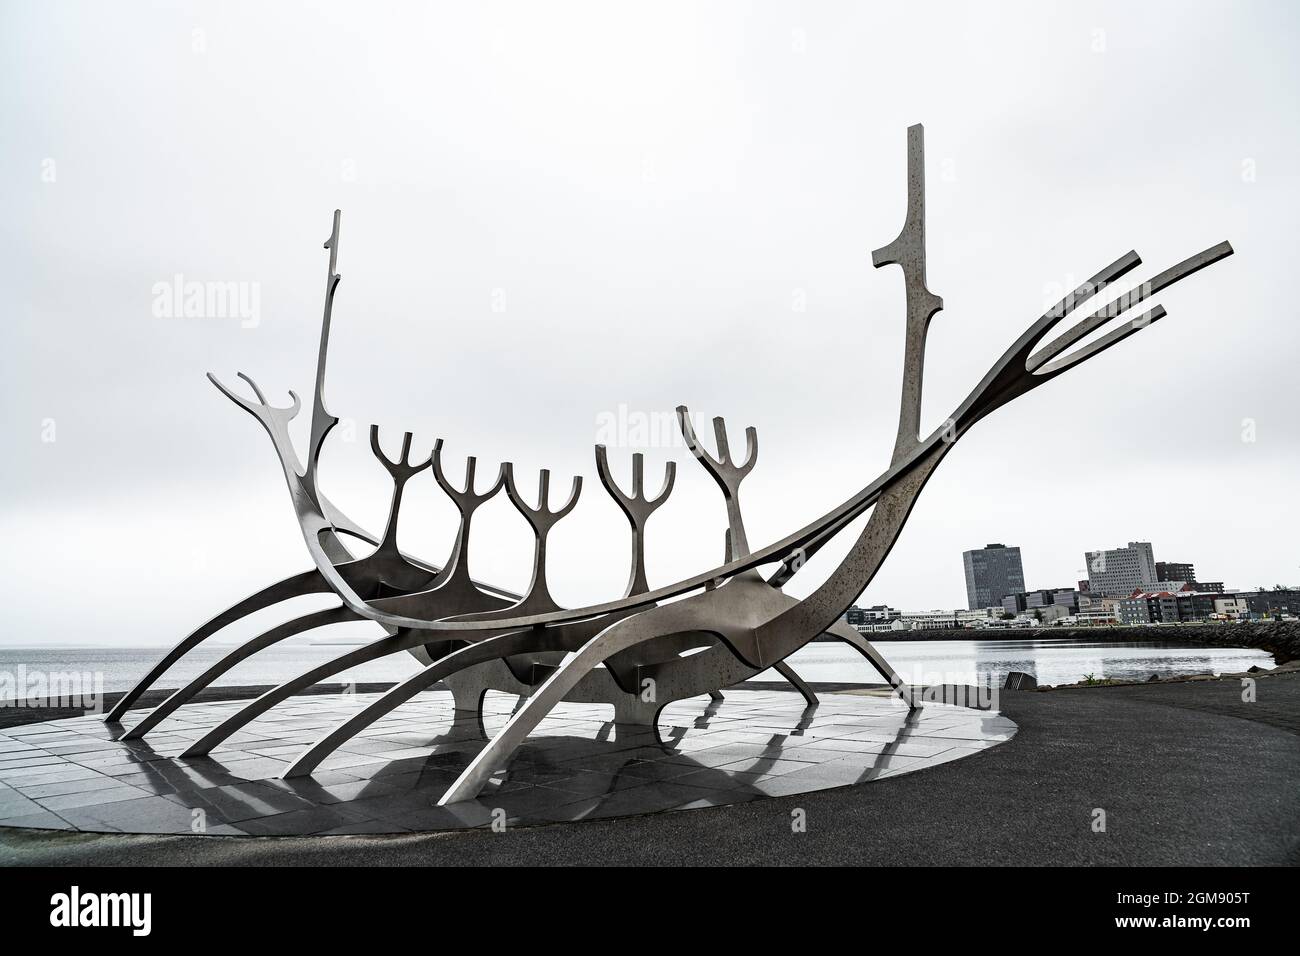 Sun Voyager sculpture in Iceland Stock Photo